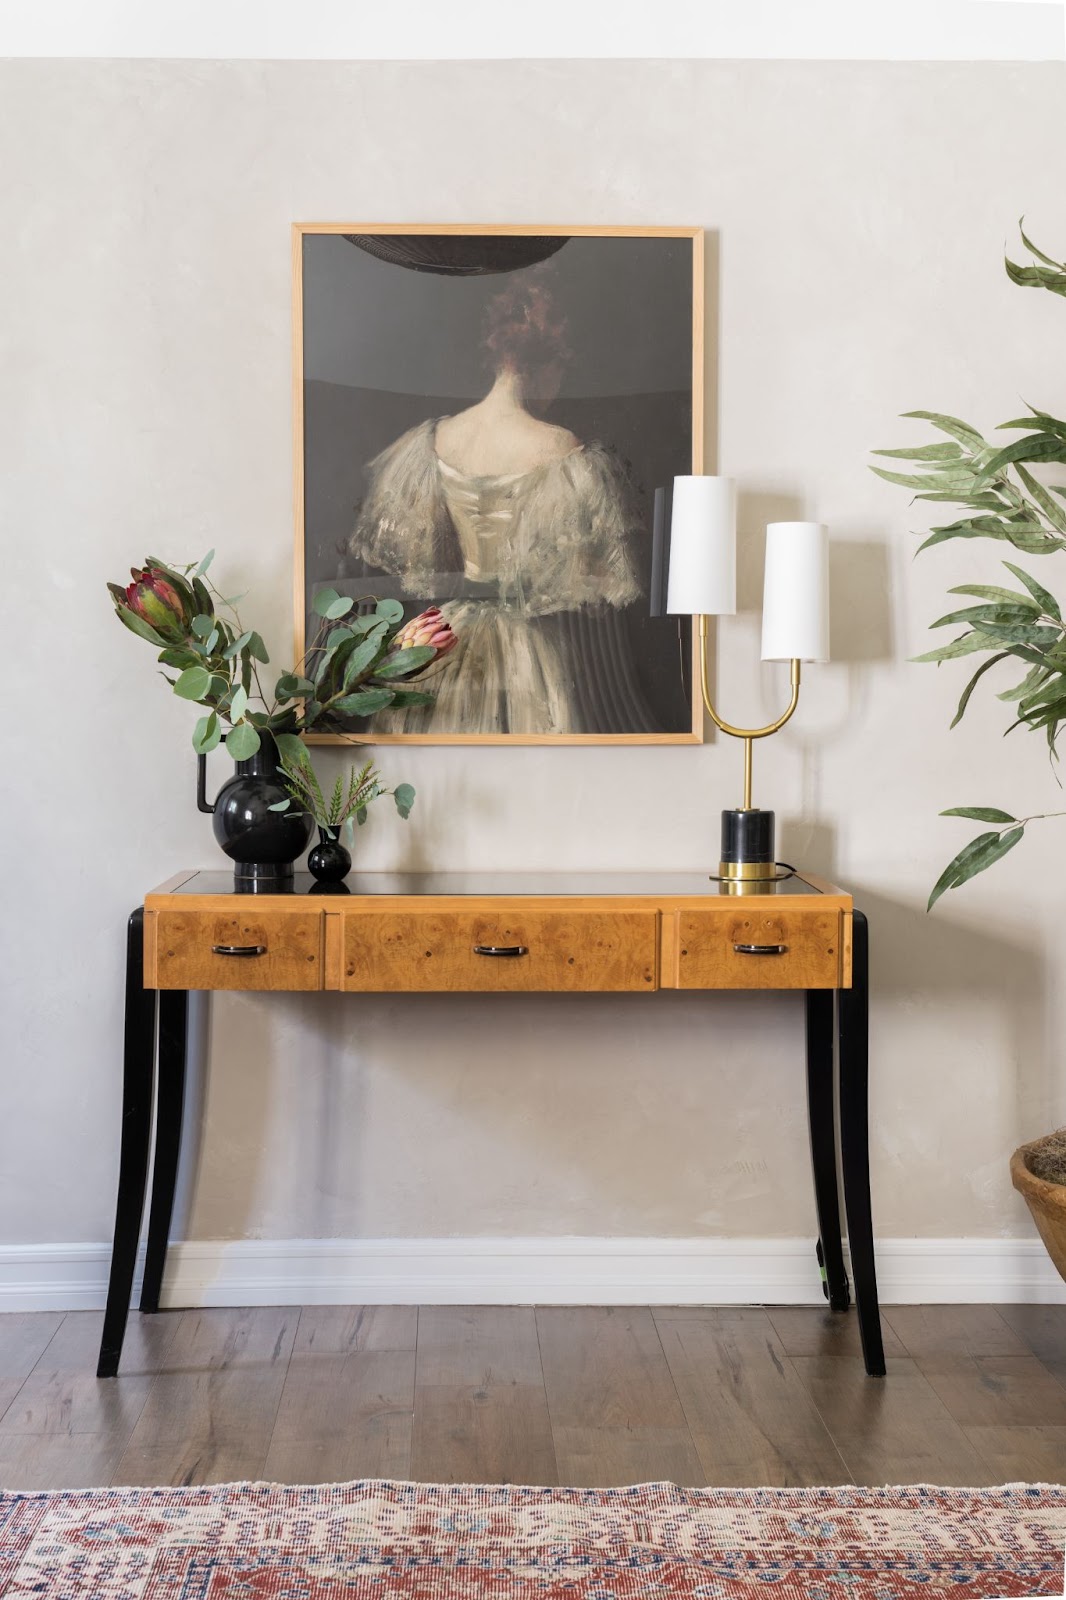 Minimalist vignette: Neutral tones, a painting of a woman in a vintage dress facing away, a petite console table, black vases with floral branches, and a modern table lamp for understated elegance.